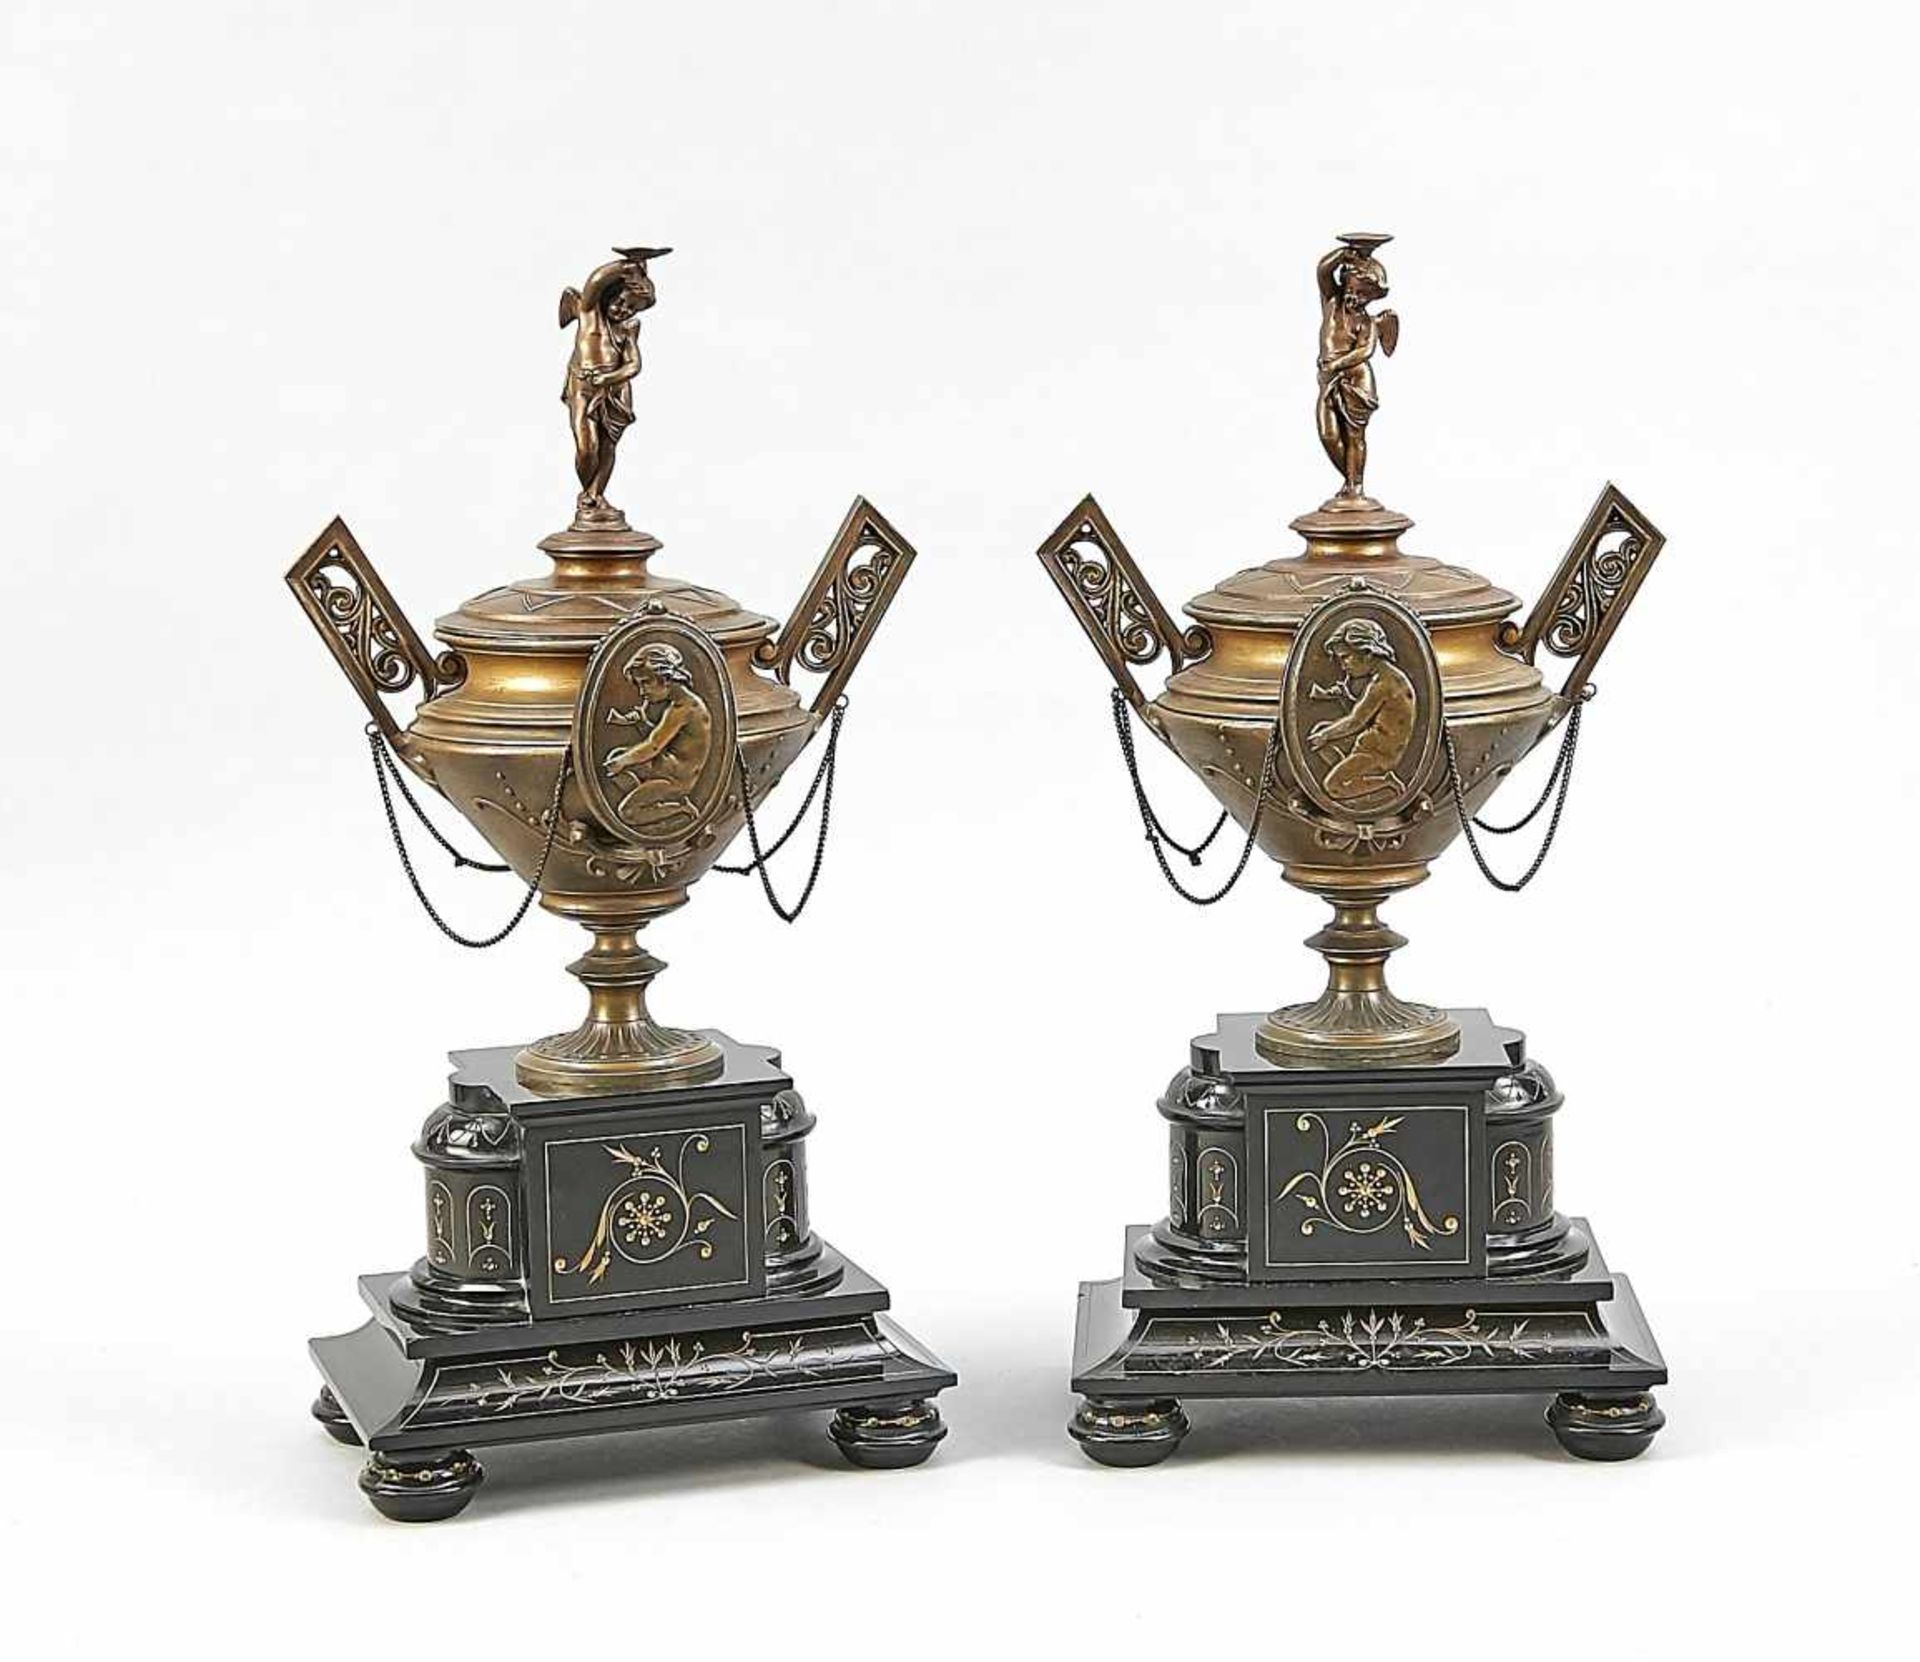 Two side plates around 1900, lidded vases made of bronzed cast metal with figurative